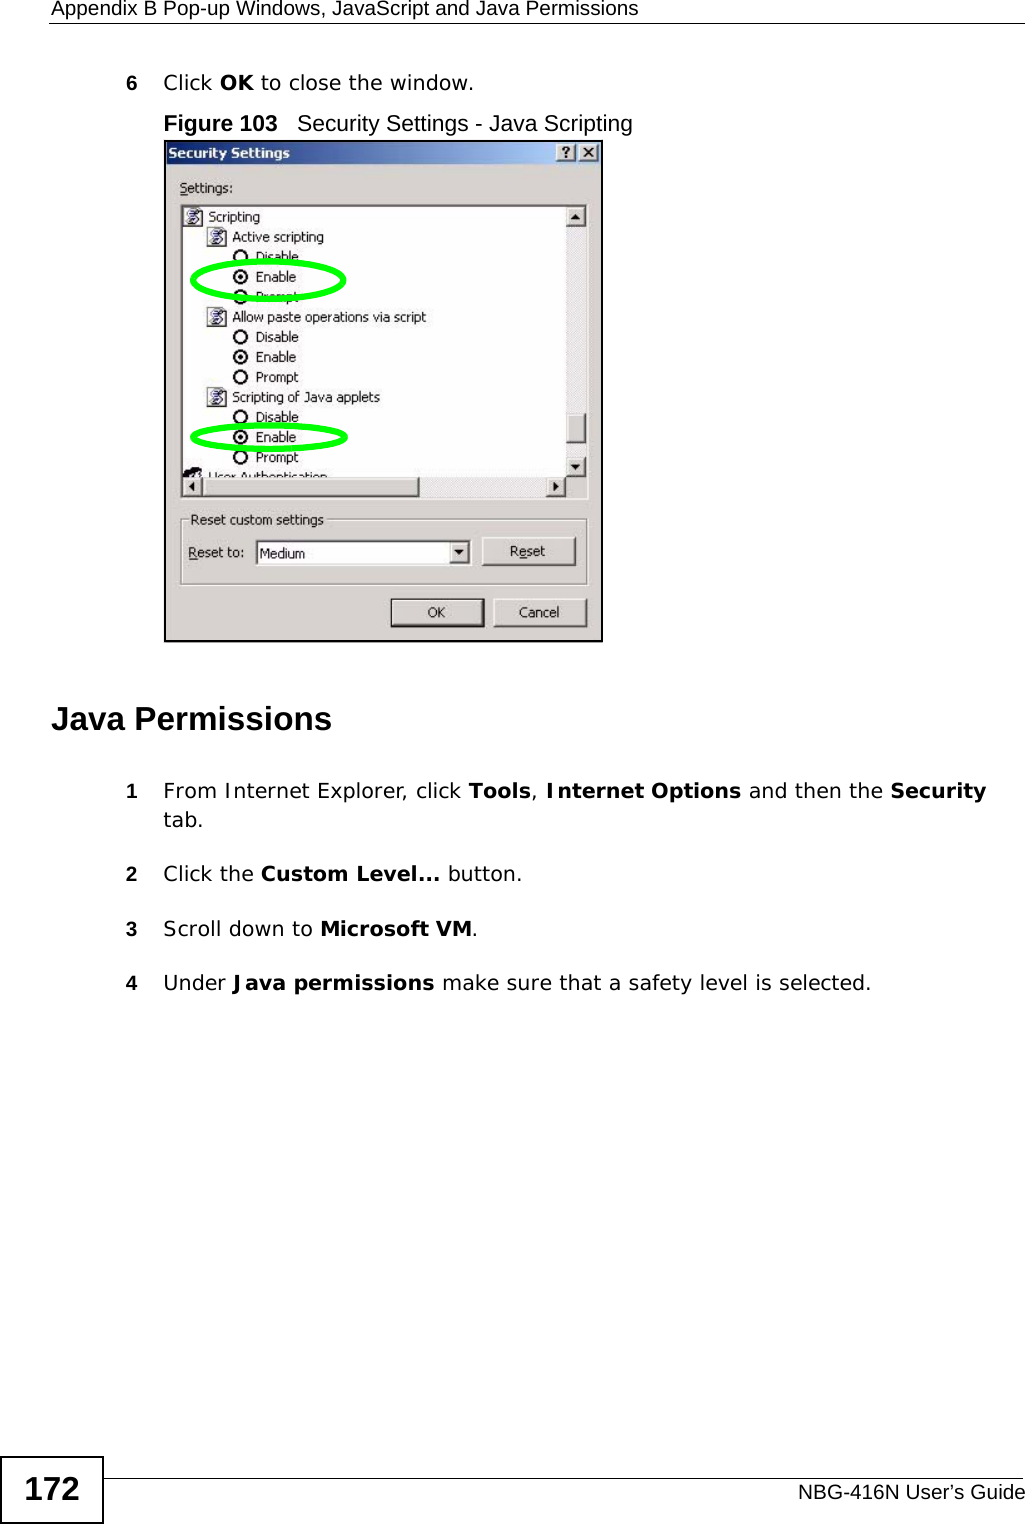 Appendix B Pop-up Windows, JavaScript and Java PermissionsNBG-416N User’s Guide1726Click OK to close the window.Figure 103   Security Settings - Java ScriptingJava Permissions1From Internet Explorer, click Tools, Internet Options and then the Security tab. 2Click the Custom Level... button. 3Scroll down to Microsoft VM. 4Under Java permissions make sure that a safety level is selected.